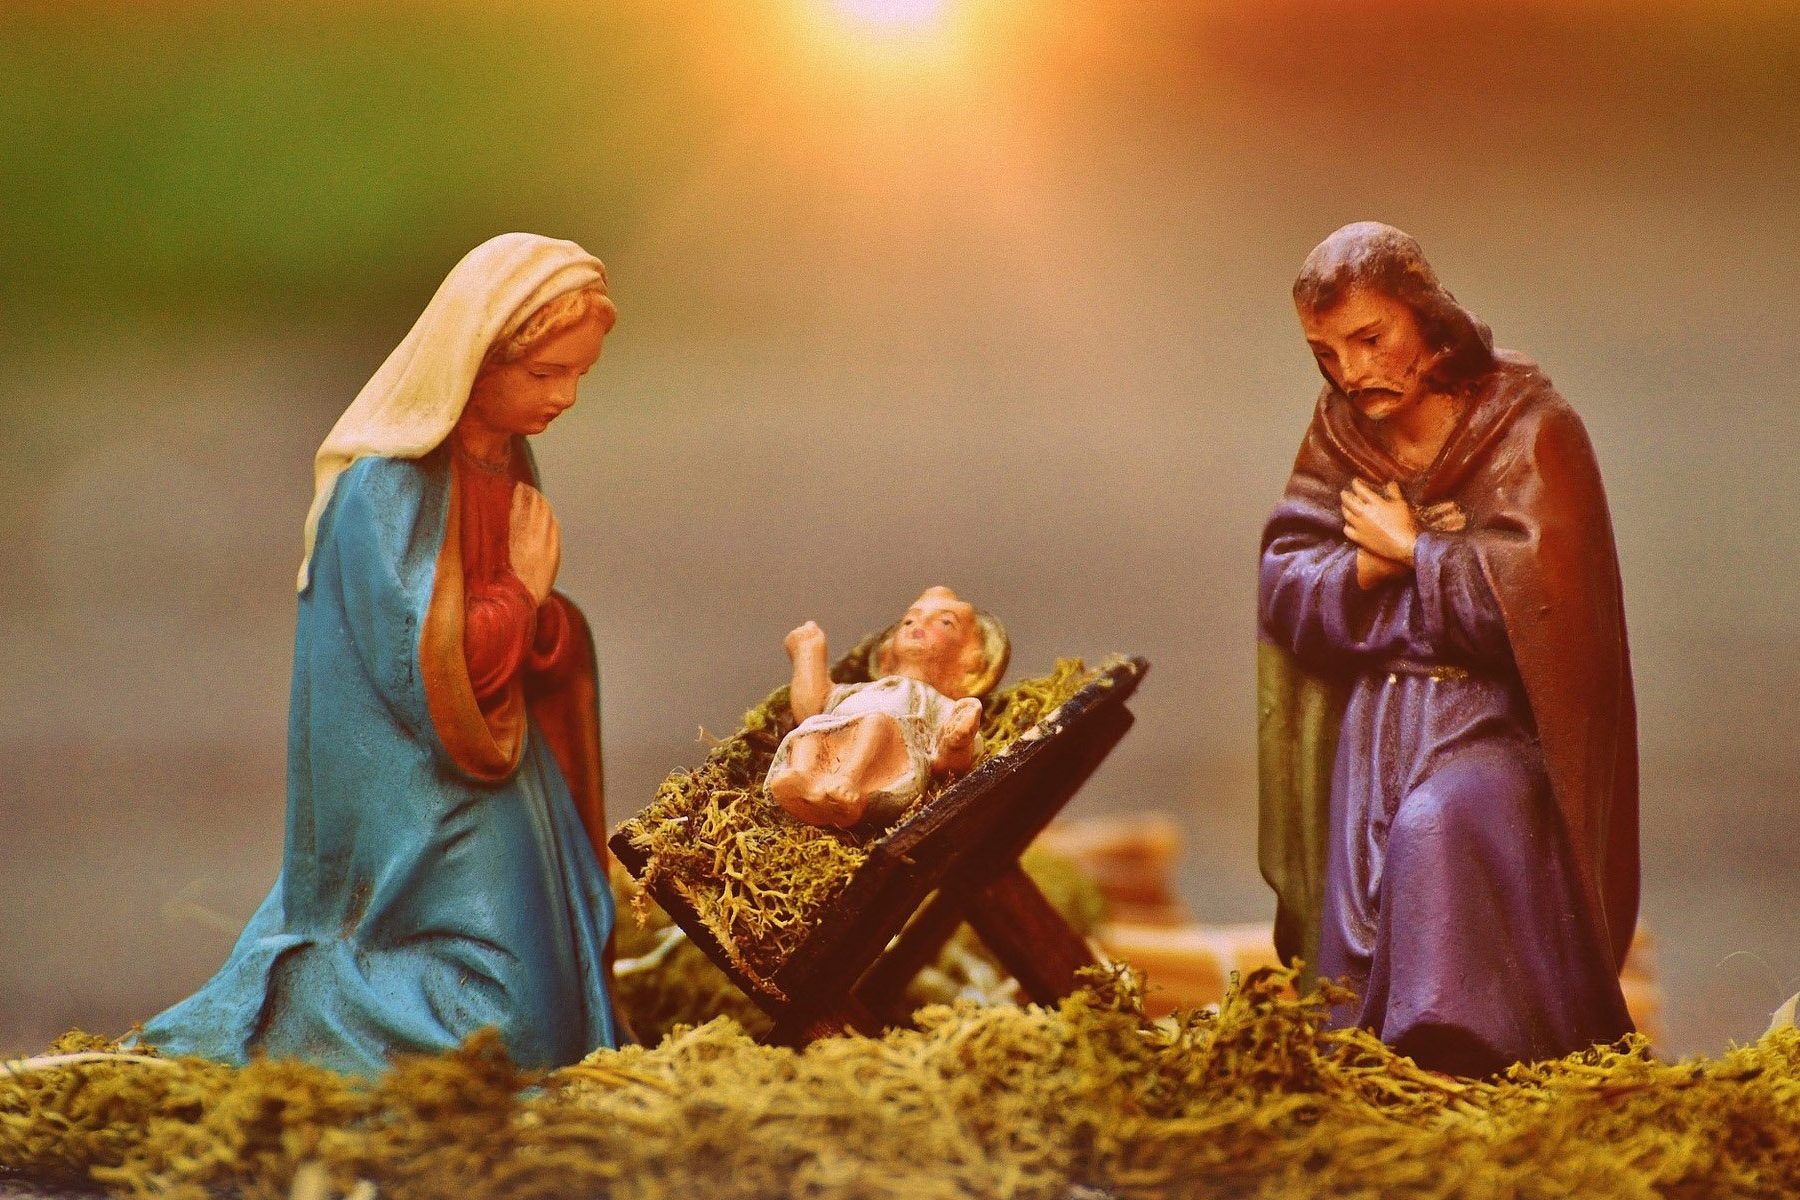 Christmas Novena Day One: Mercy and love